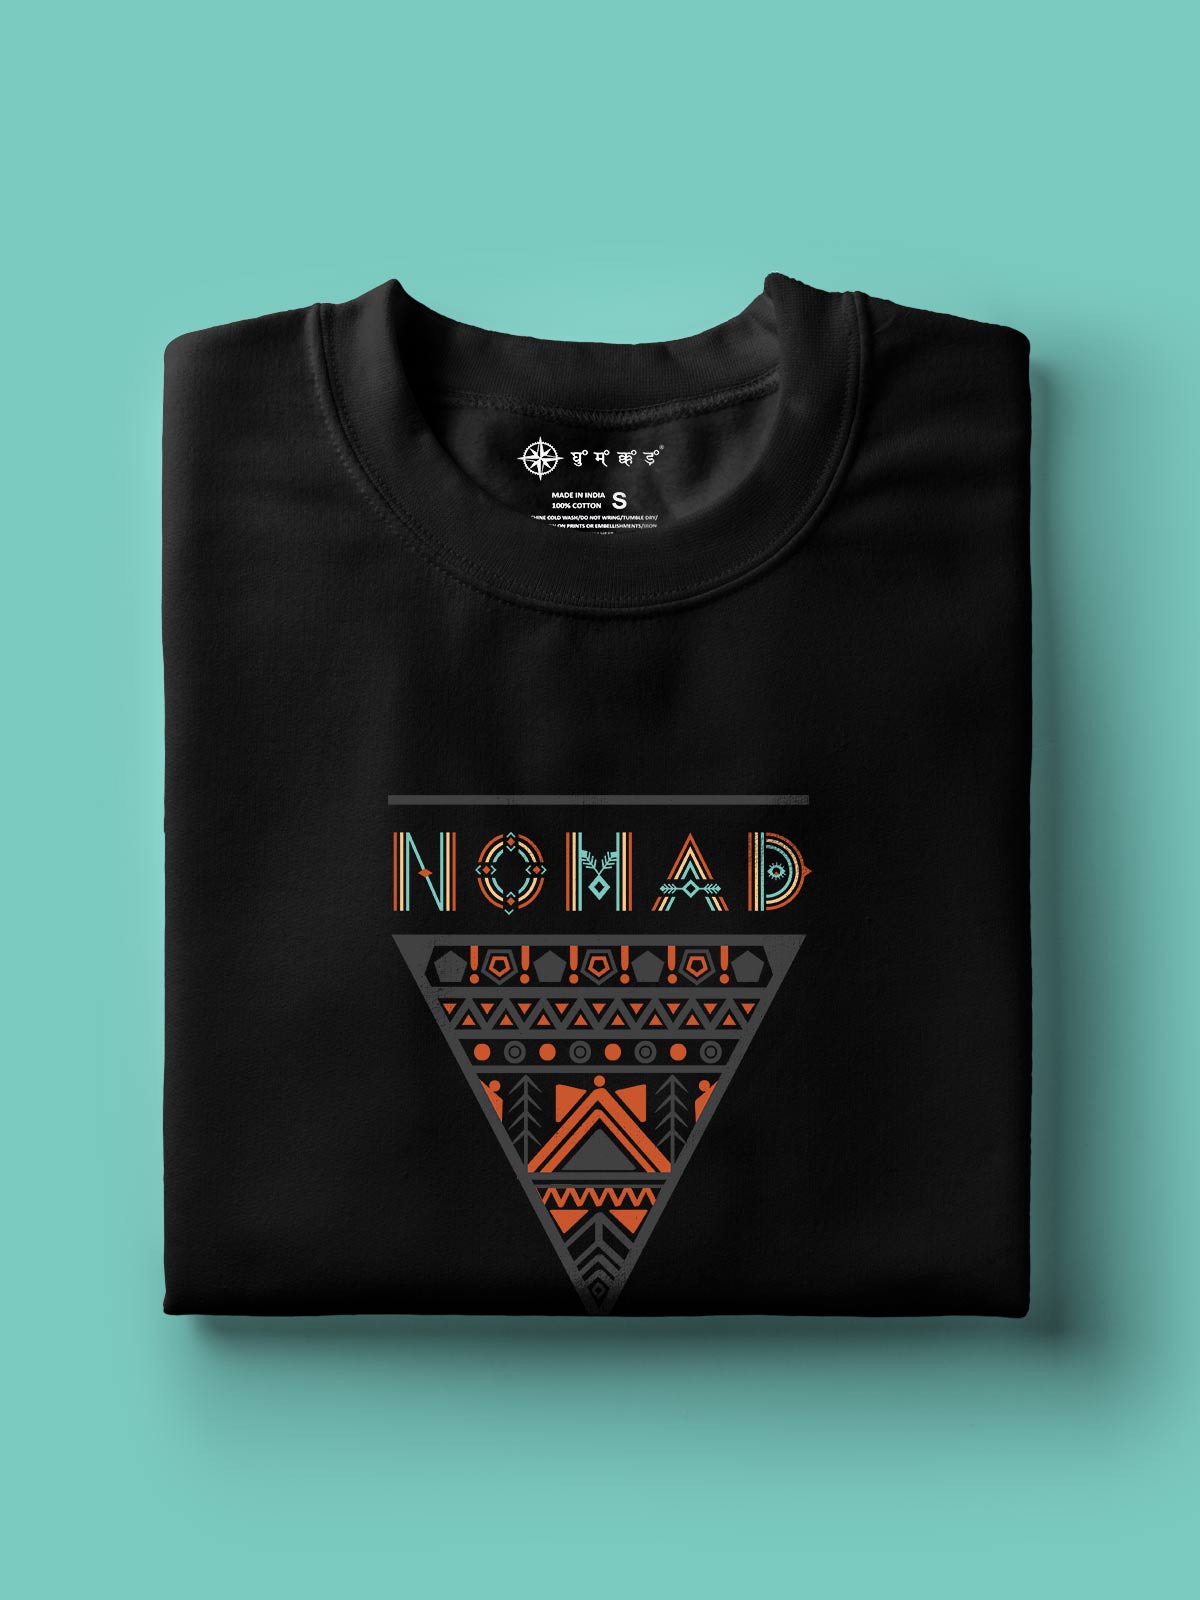 Nomad-printed-t-shirt-for-men by Ghumakkad